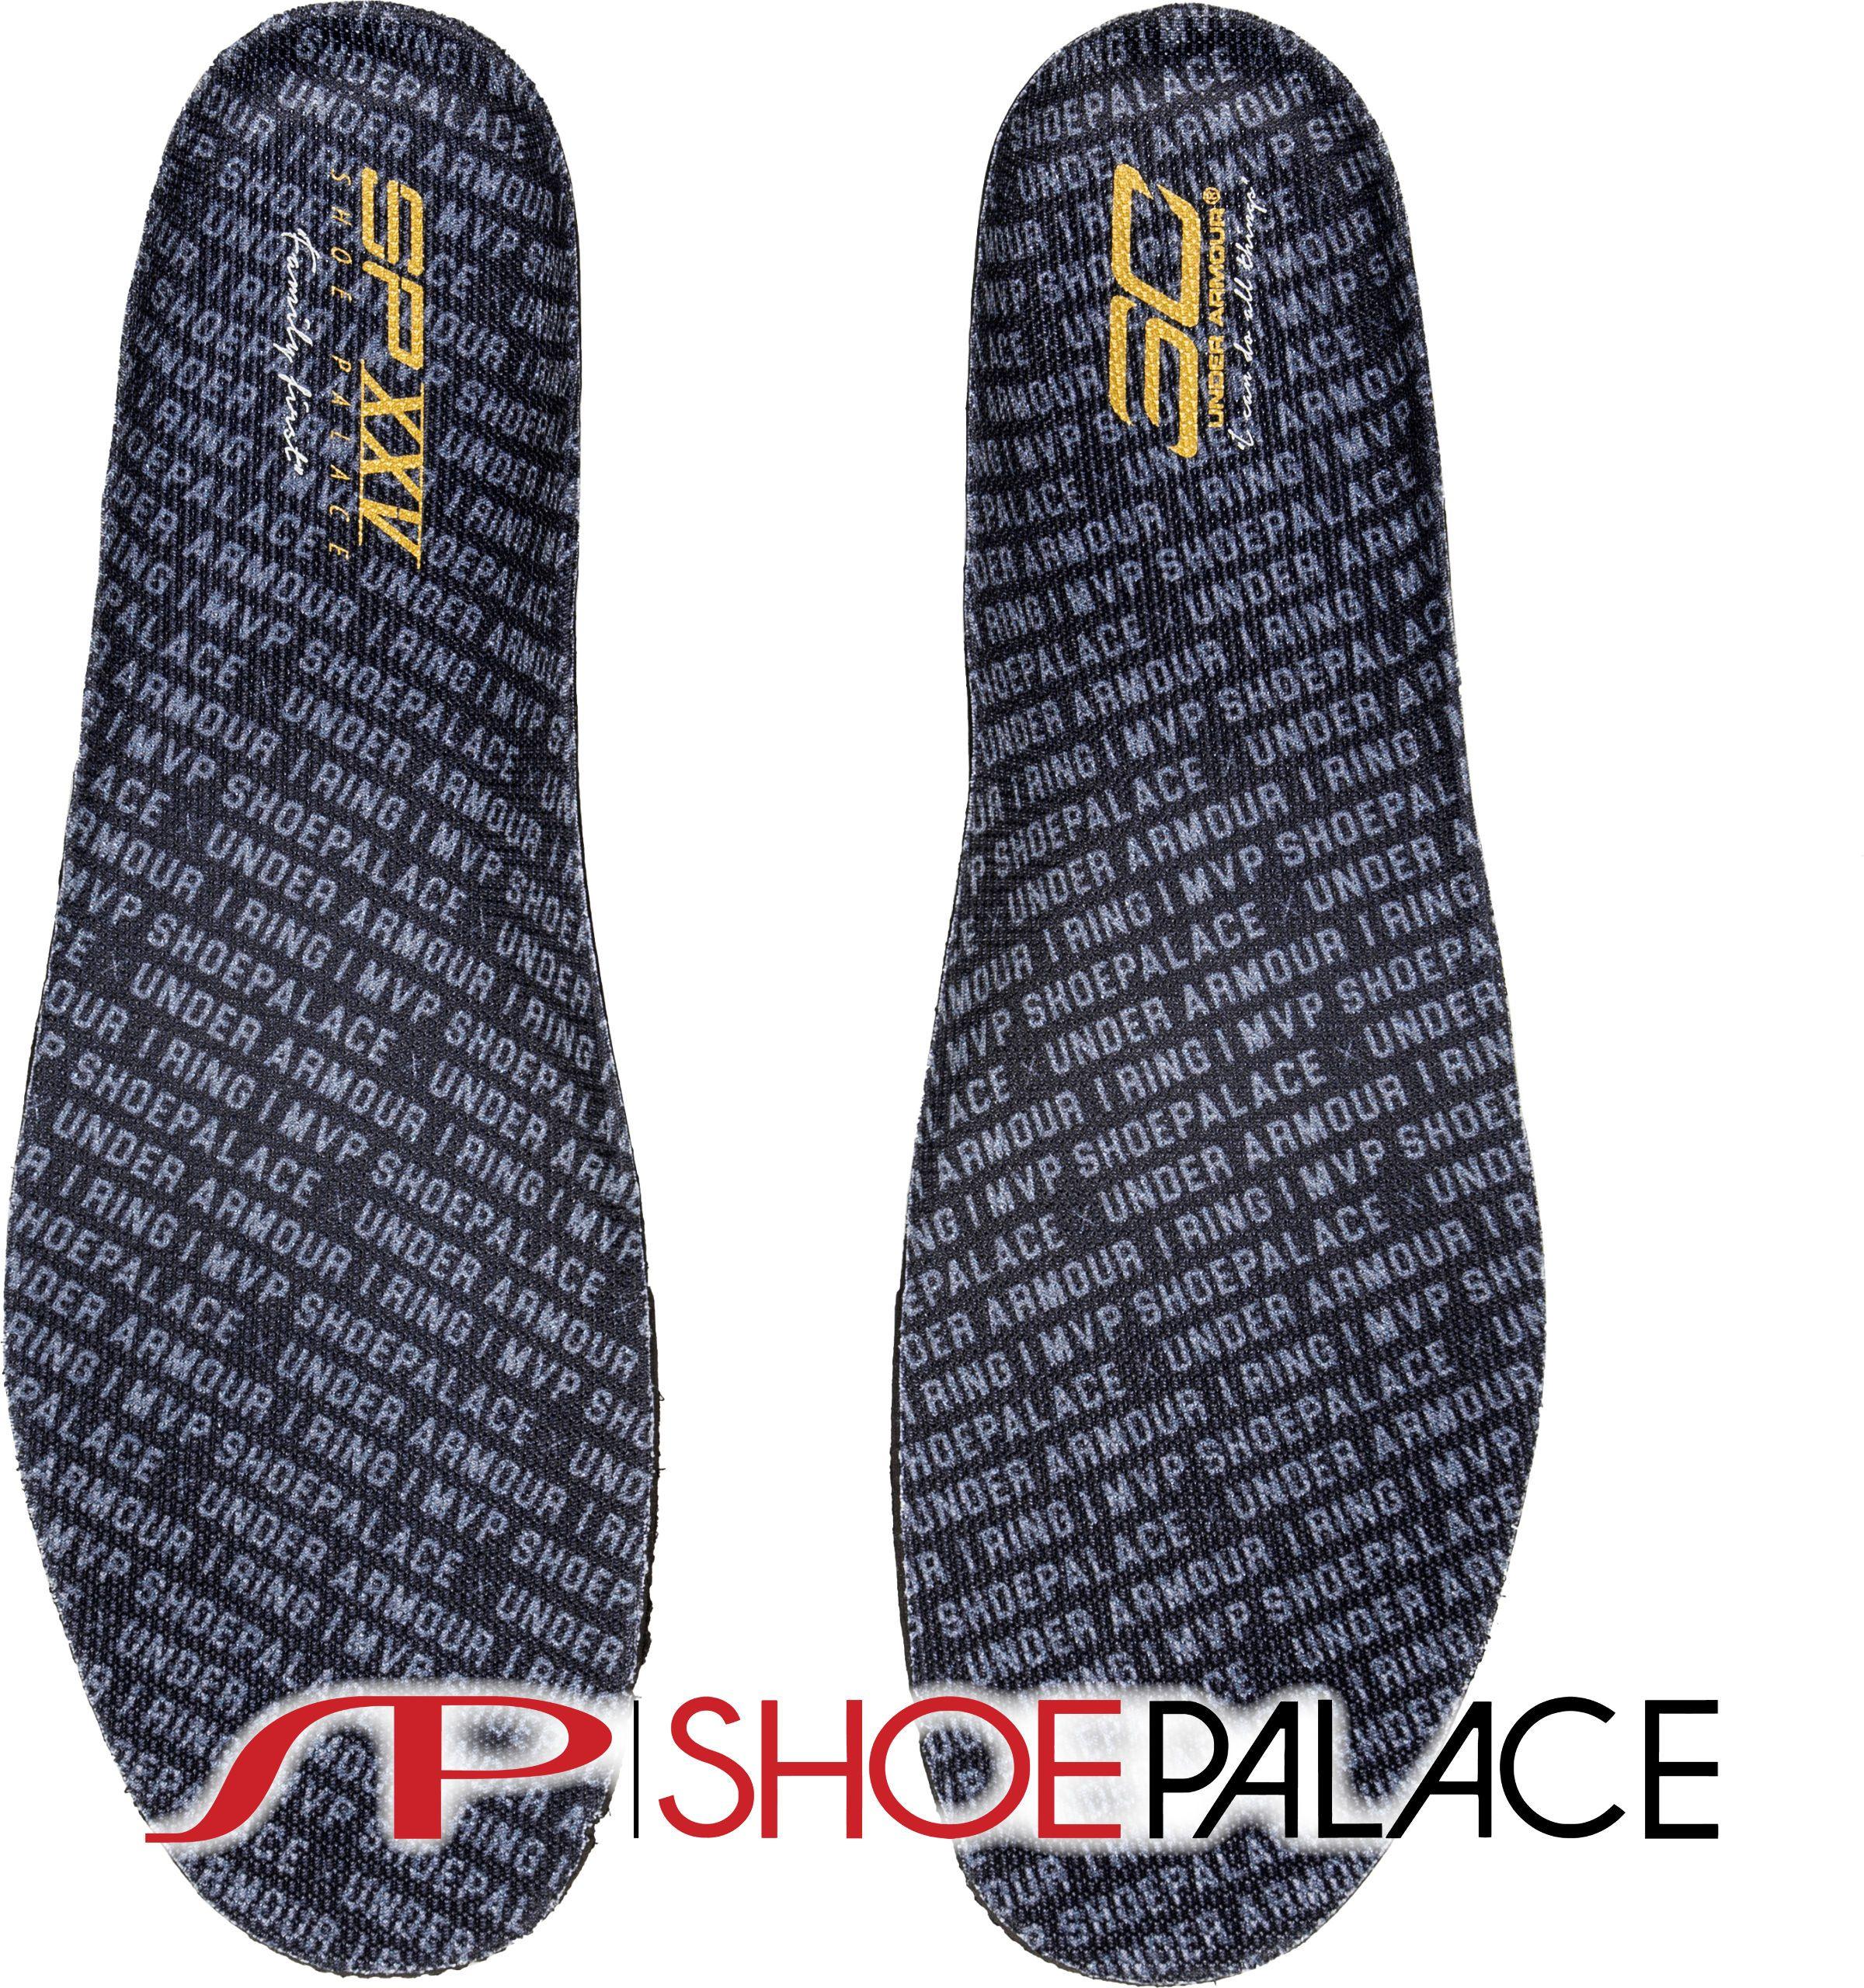 Shoe Palace Logo - Under Armour 3022392-001 Shoe Palace X Under Armour Curry 1 25th ...